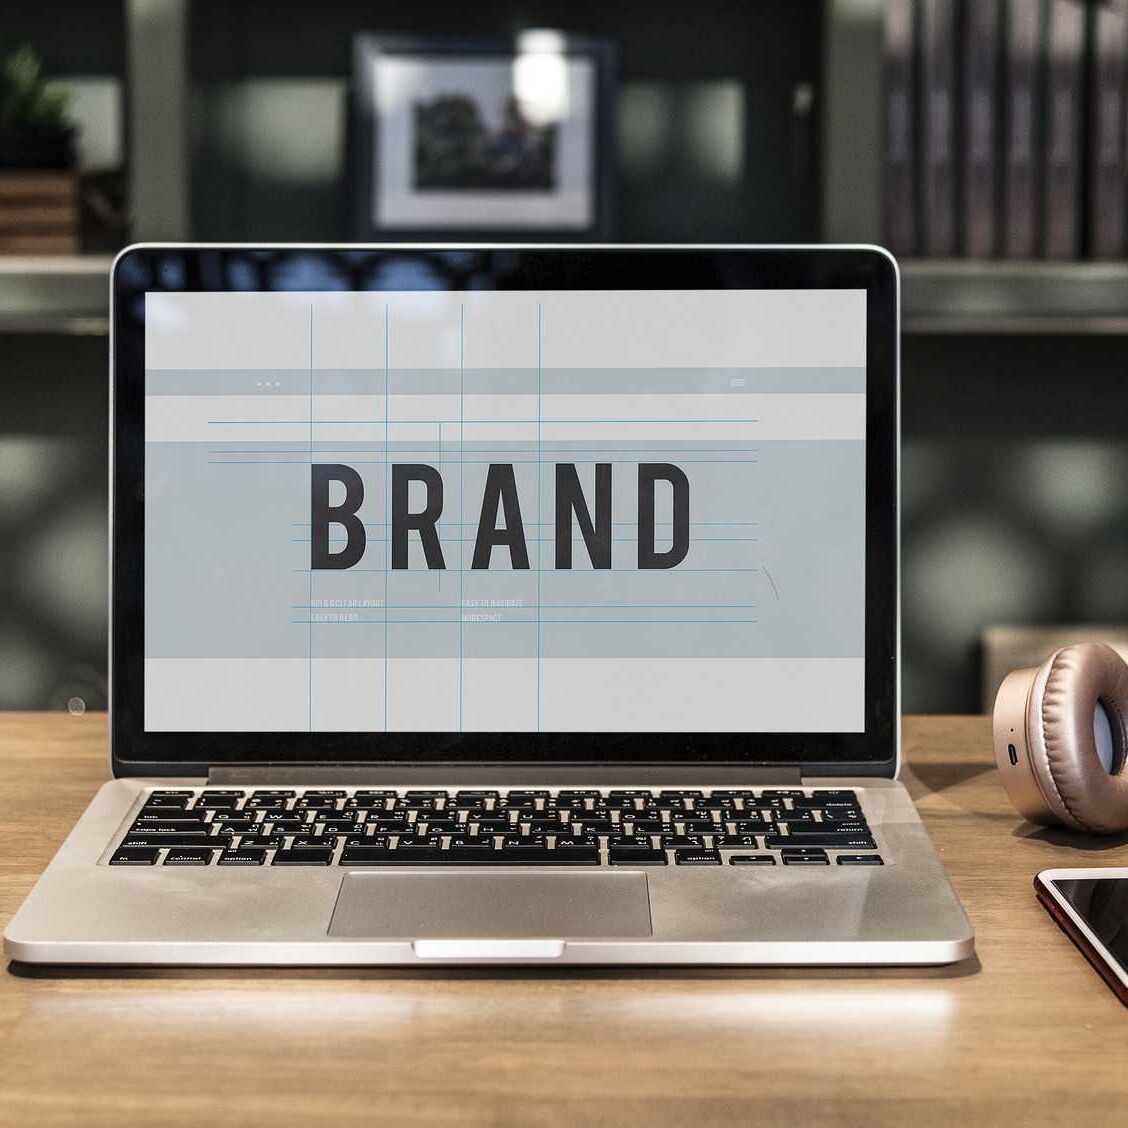 Branding is a fundamental element of a company's positioning